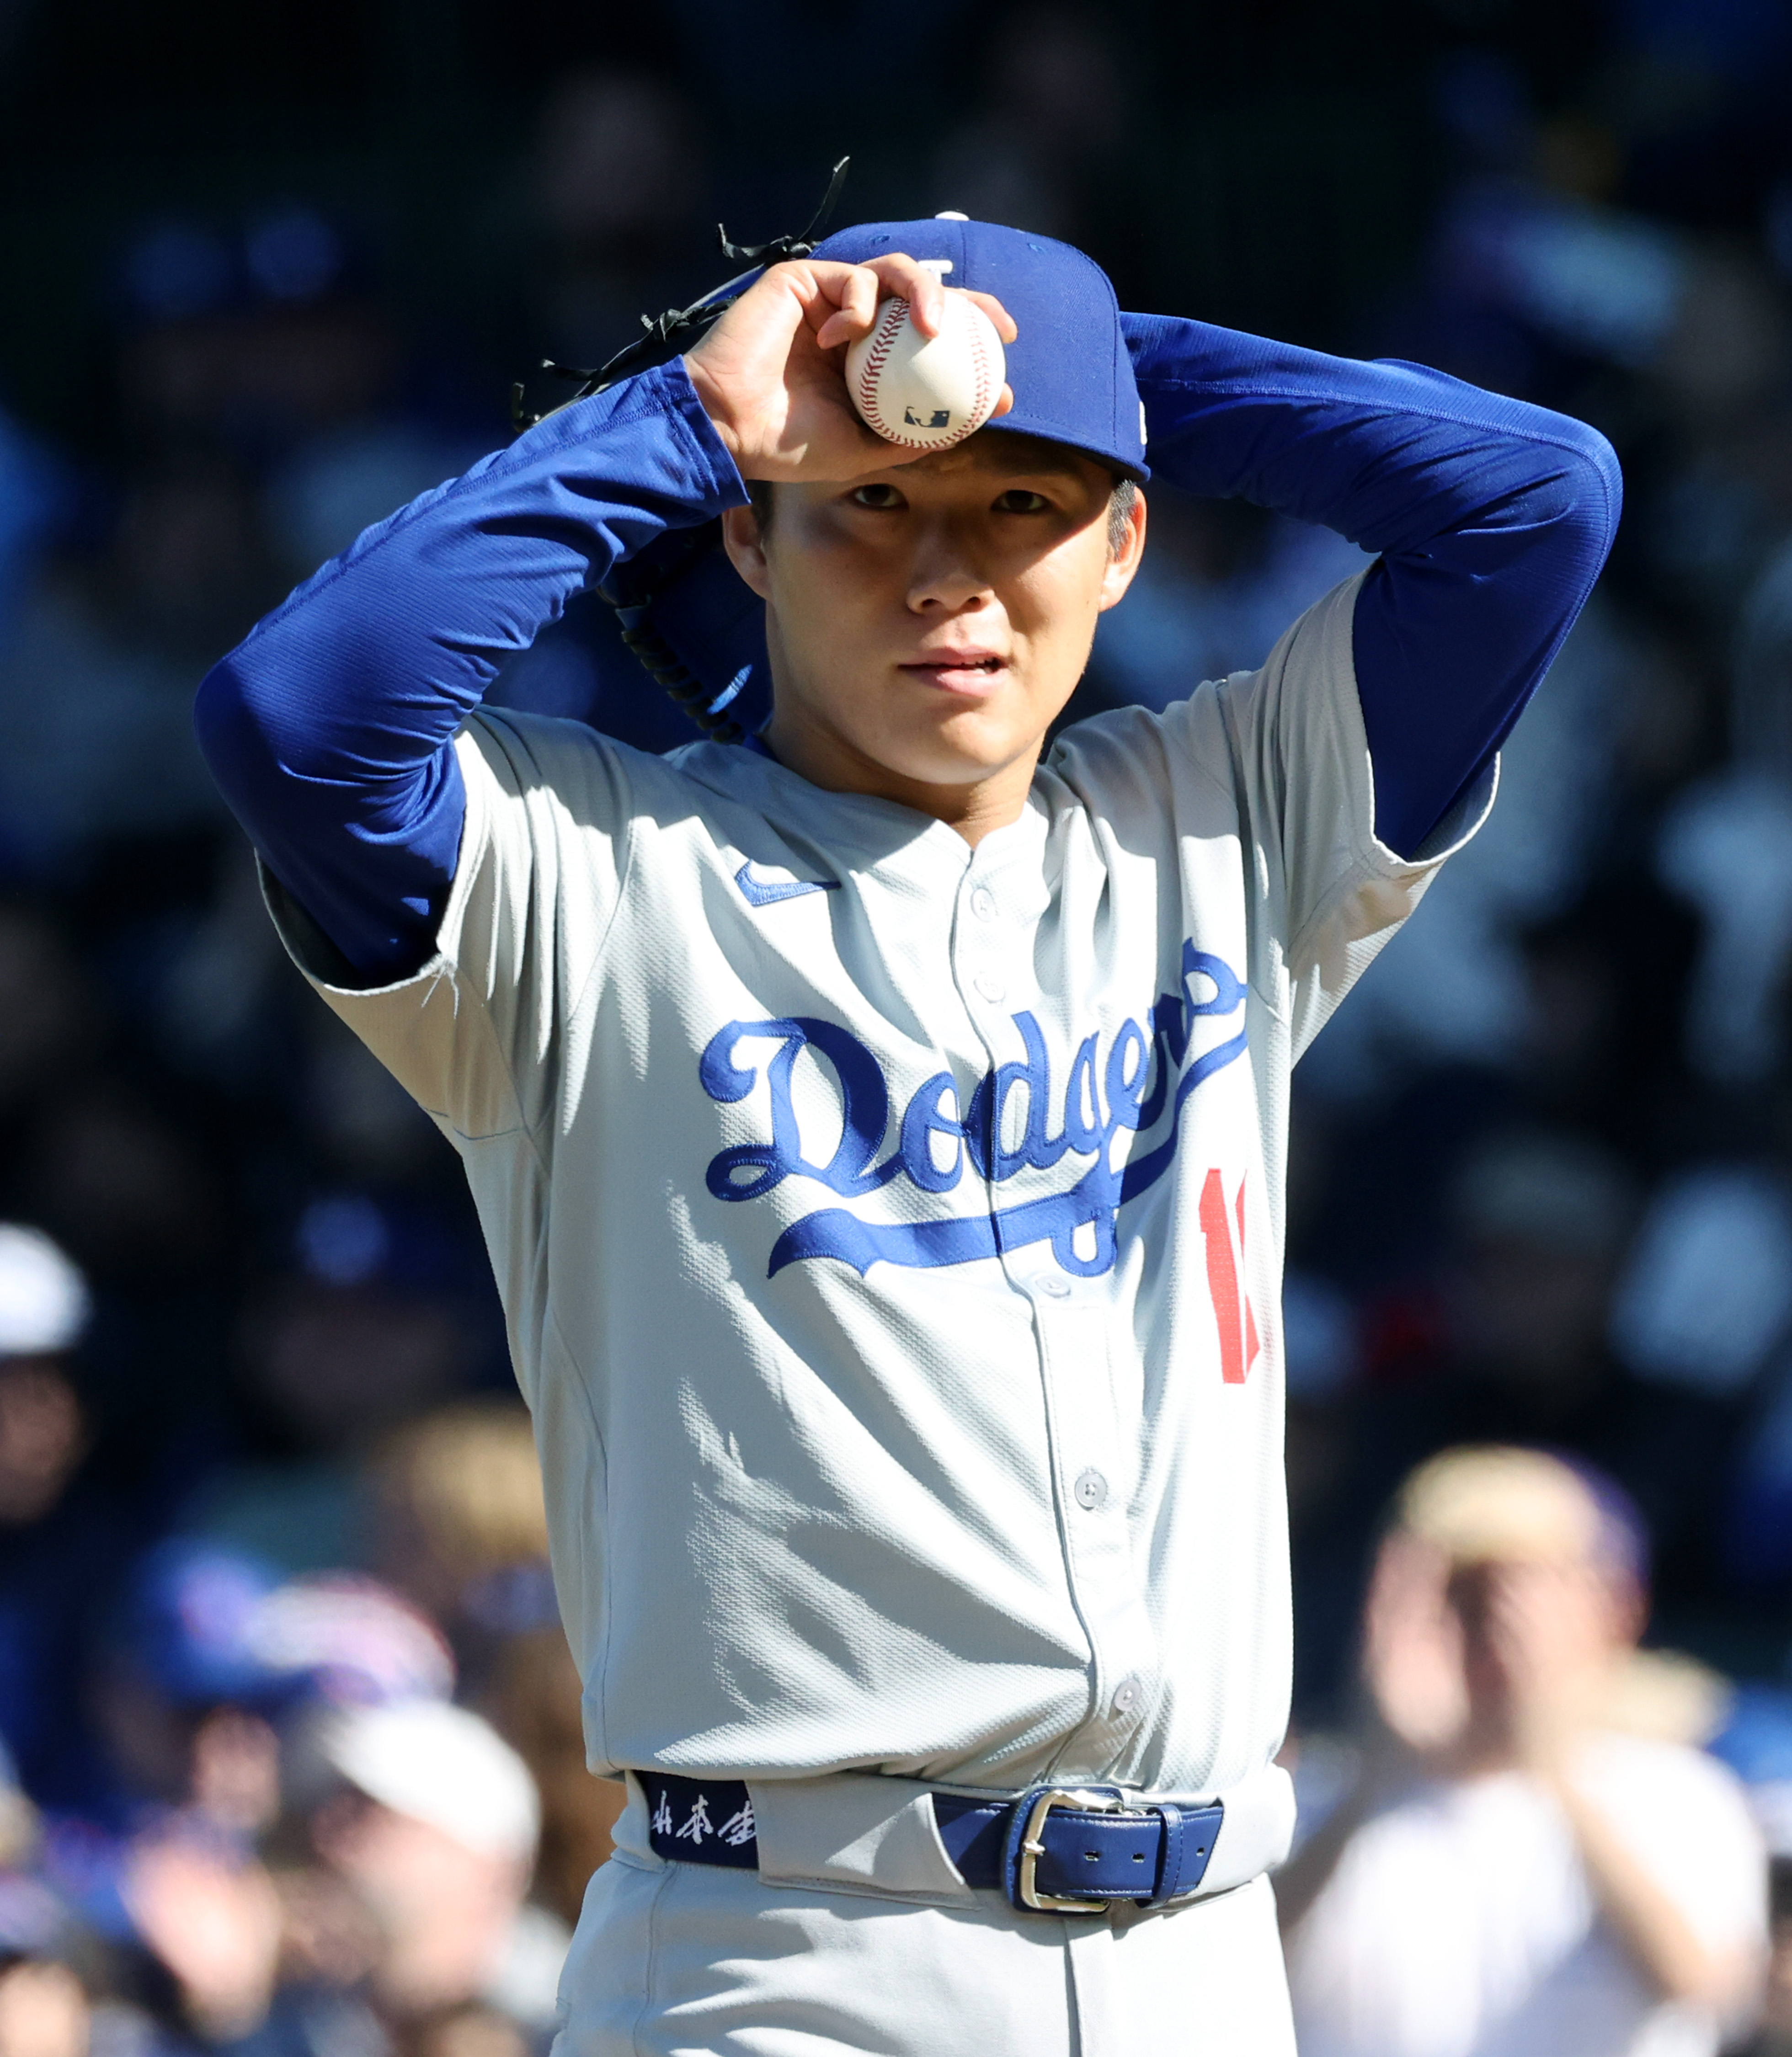 Dodgers pitcher Yoshinobu Yamamoto adjusts his cap during a game against the Cubs in the second inning on April 6, 2024, at Wrigley Field. (John J. Kim/Chicago Tribune)